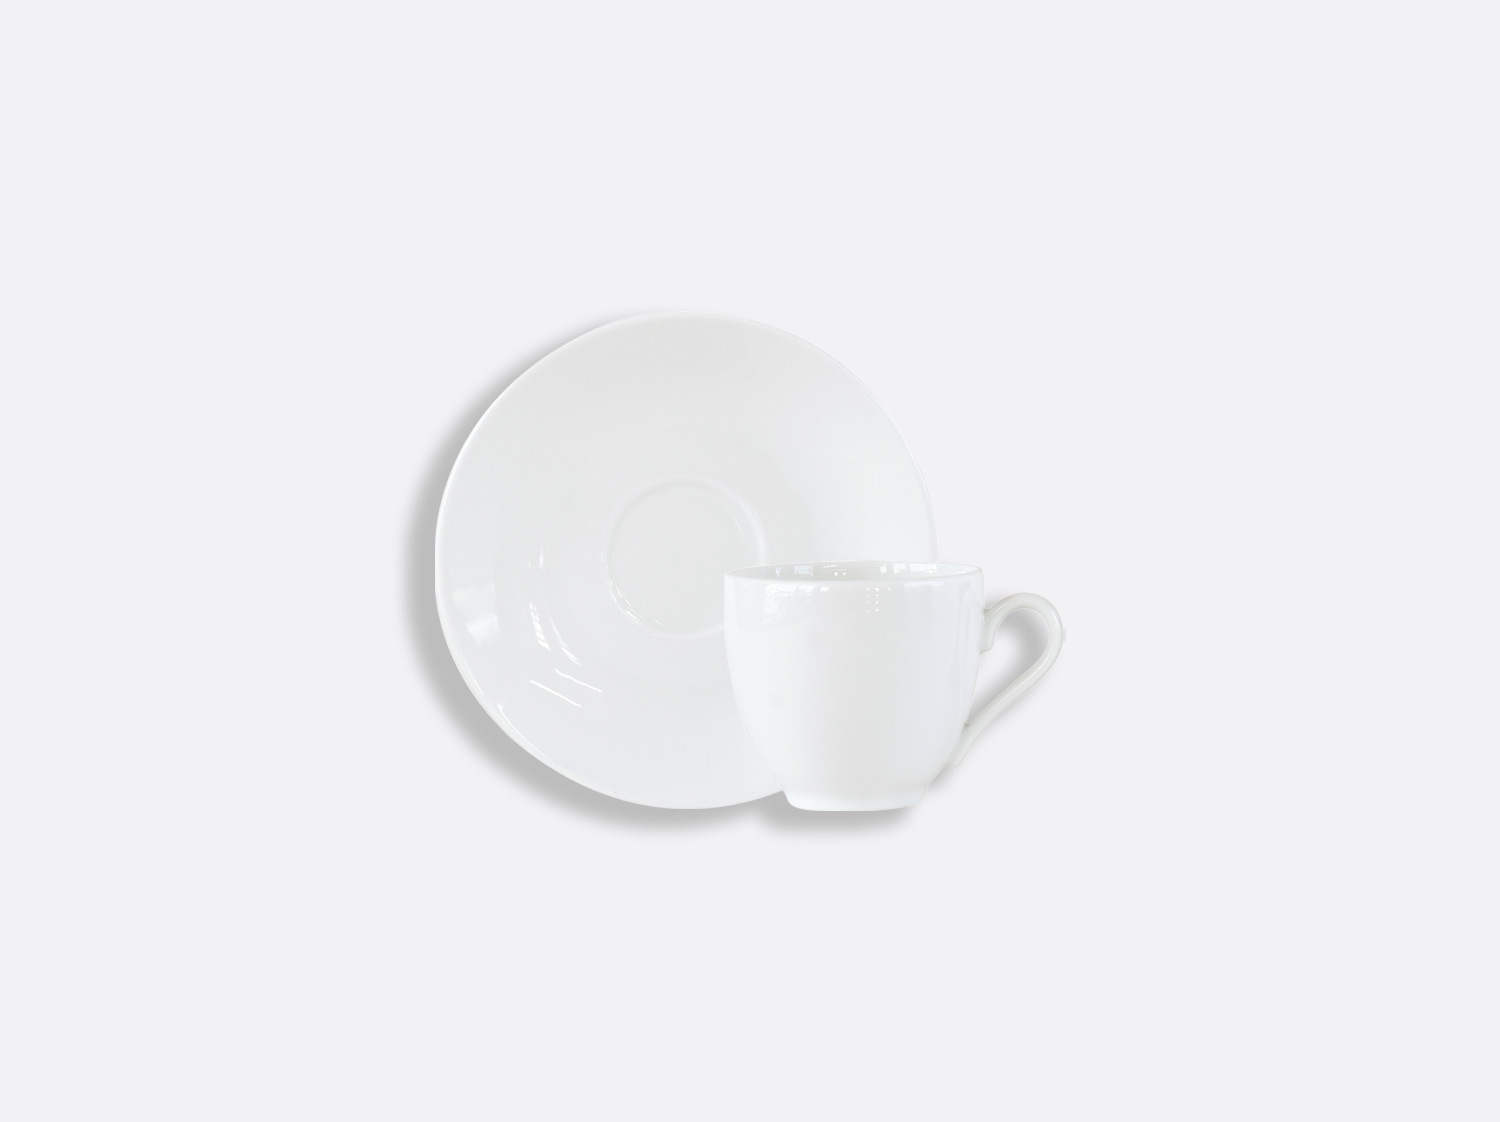 China Boule Coffee cup and saucer 10 cl of the collection Boule blanc | Bernardaud